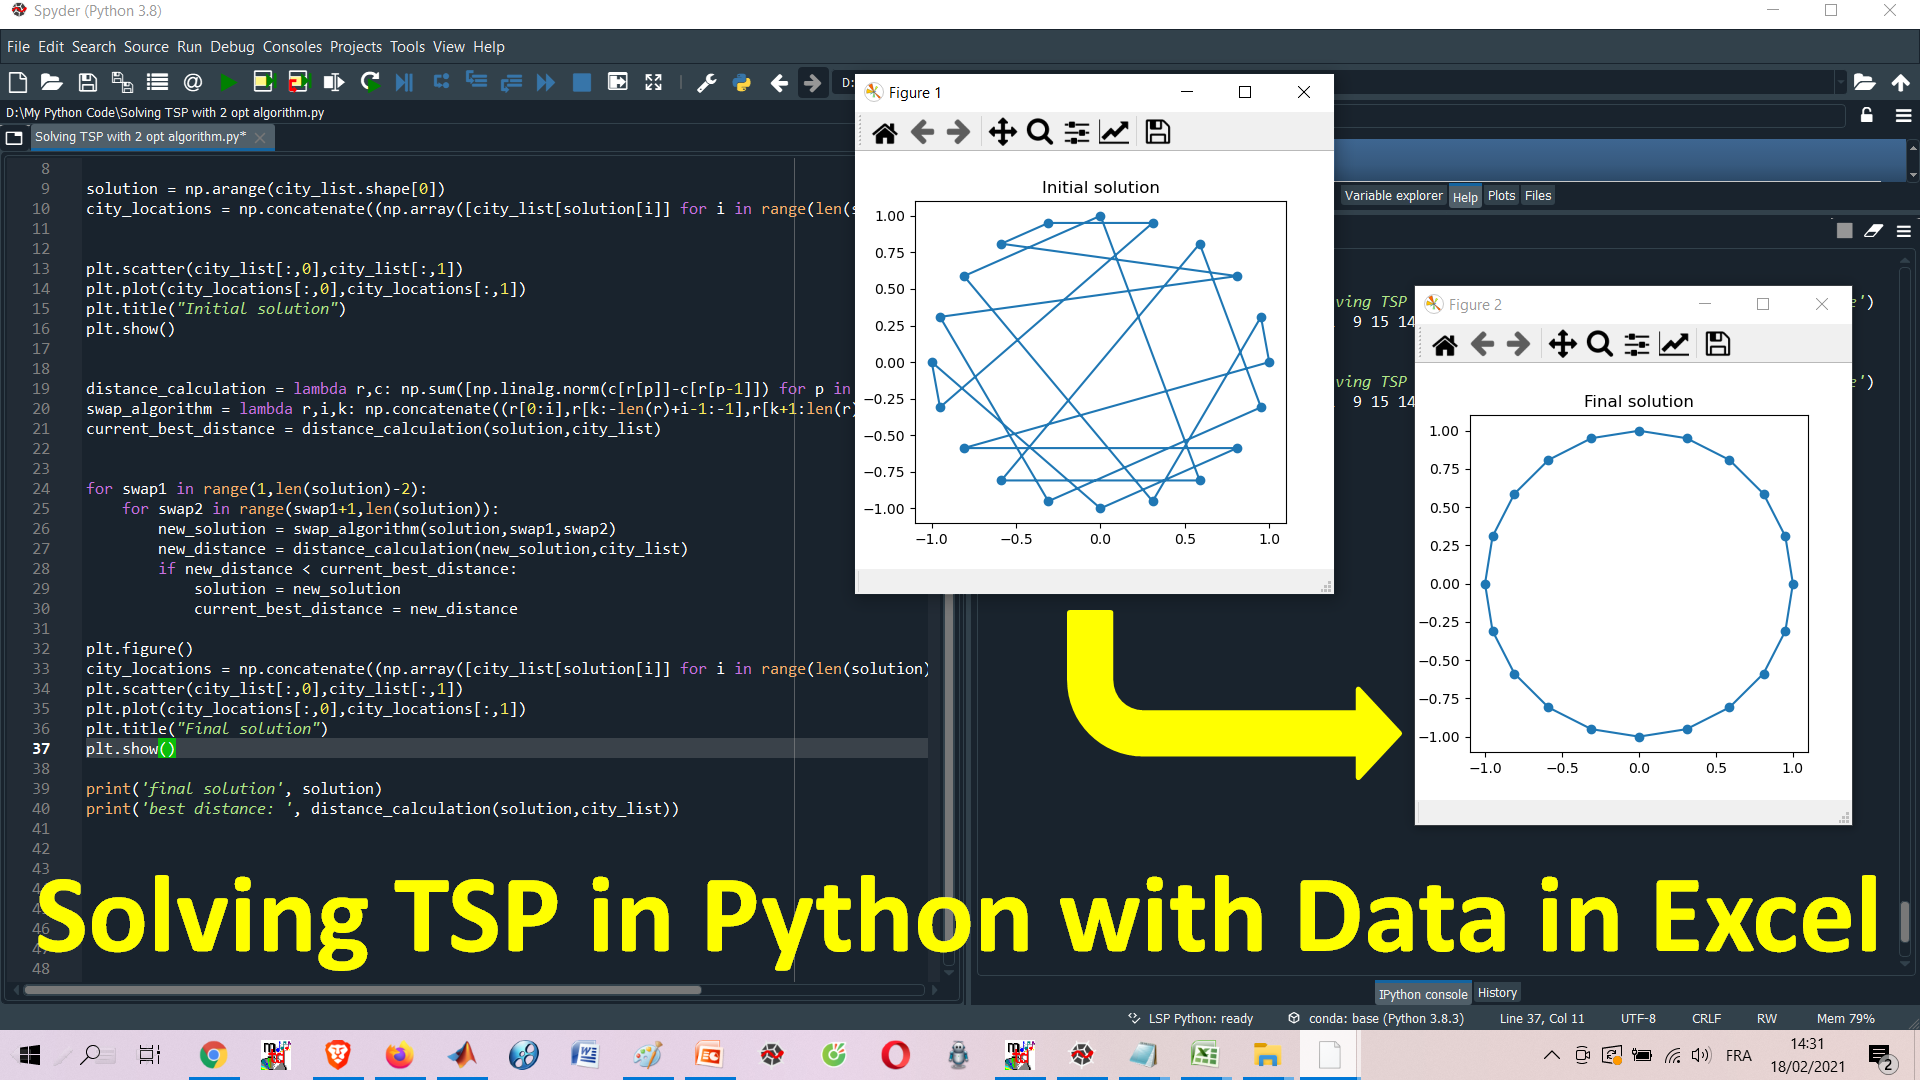 Solving TSP in Python with Data in Excel